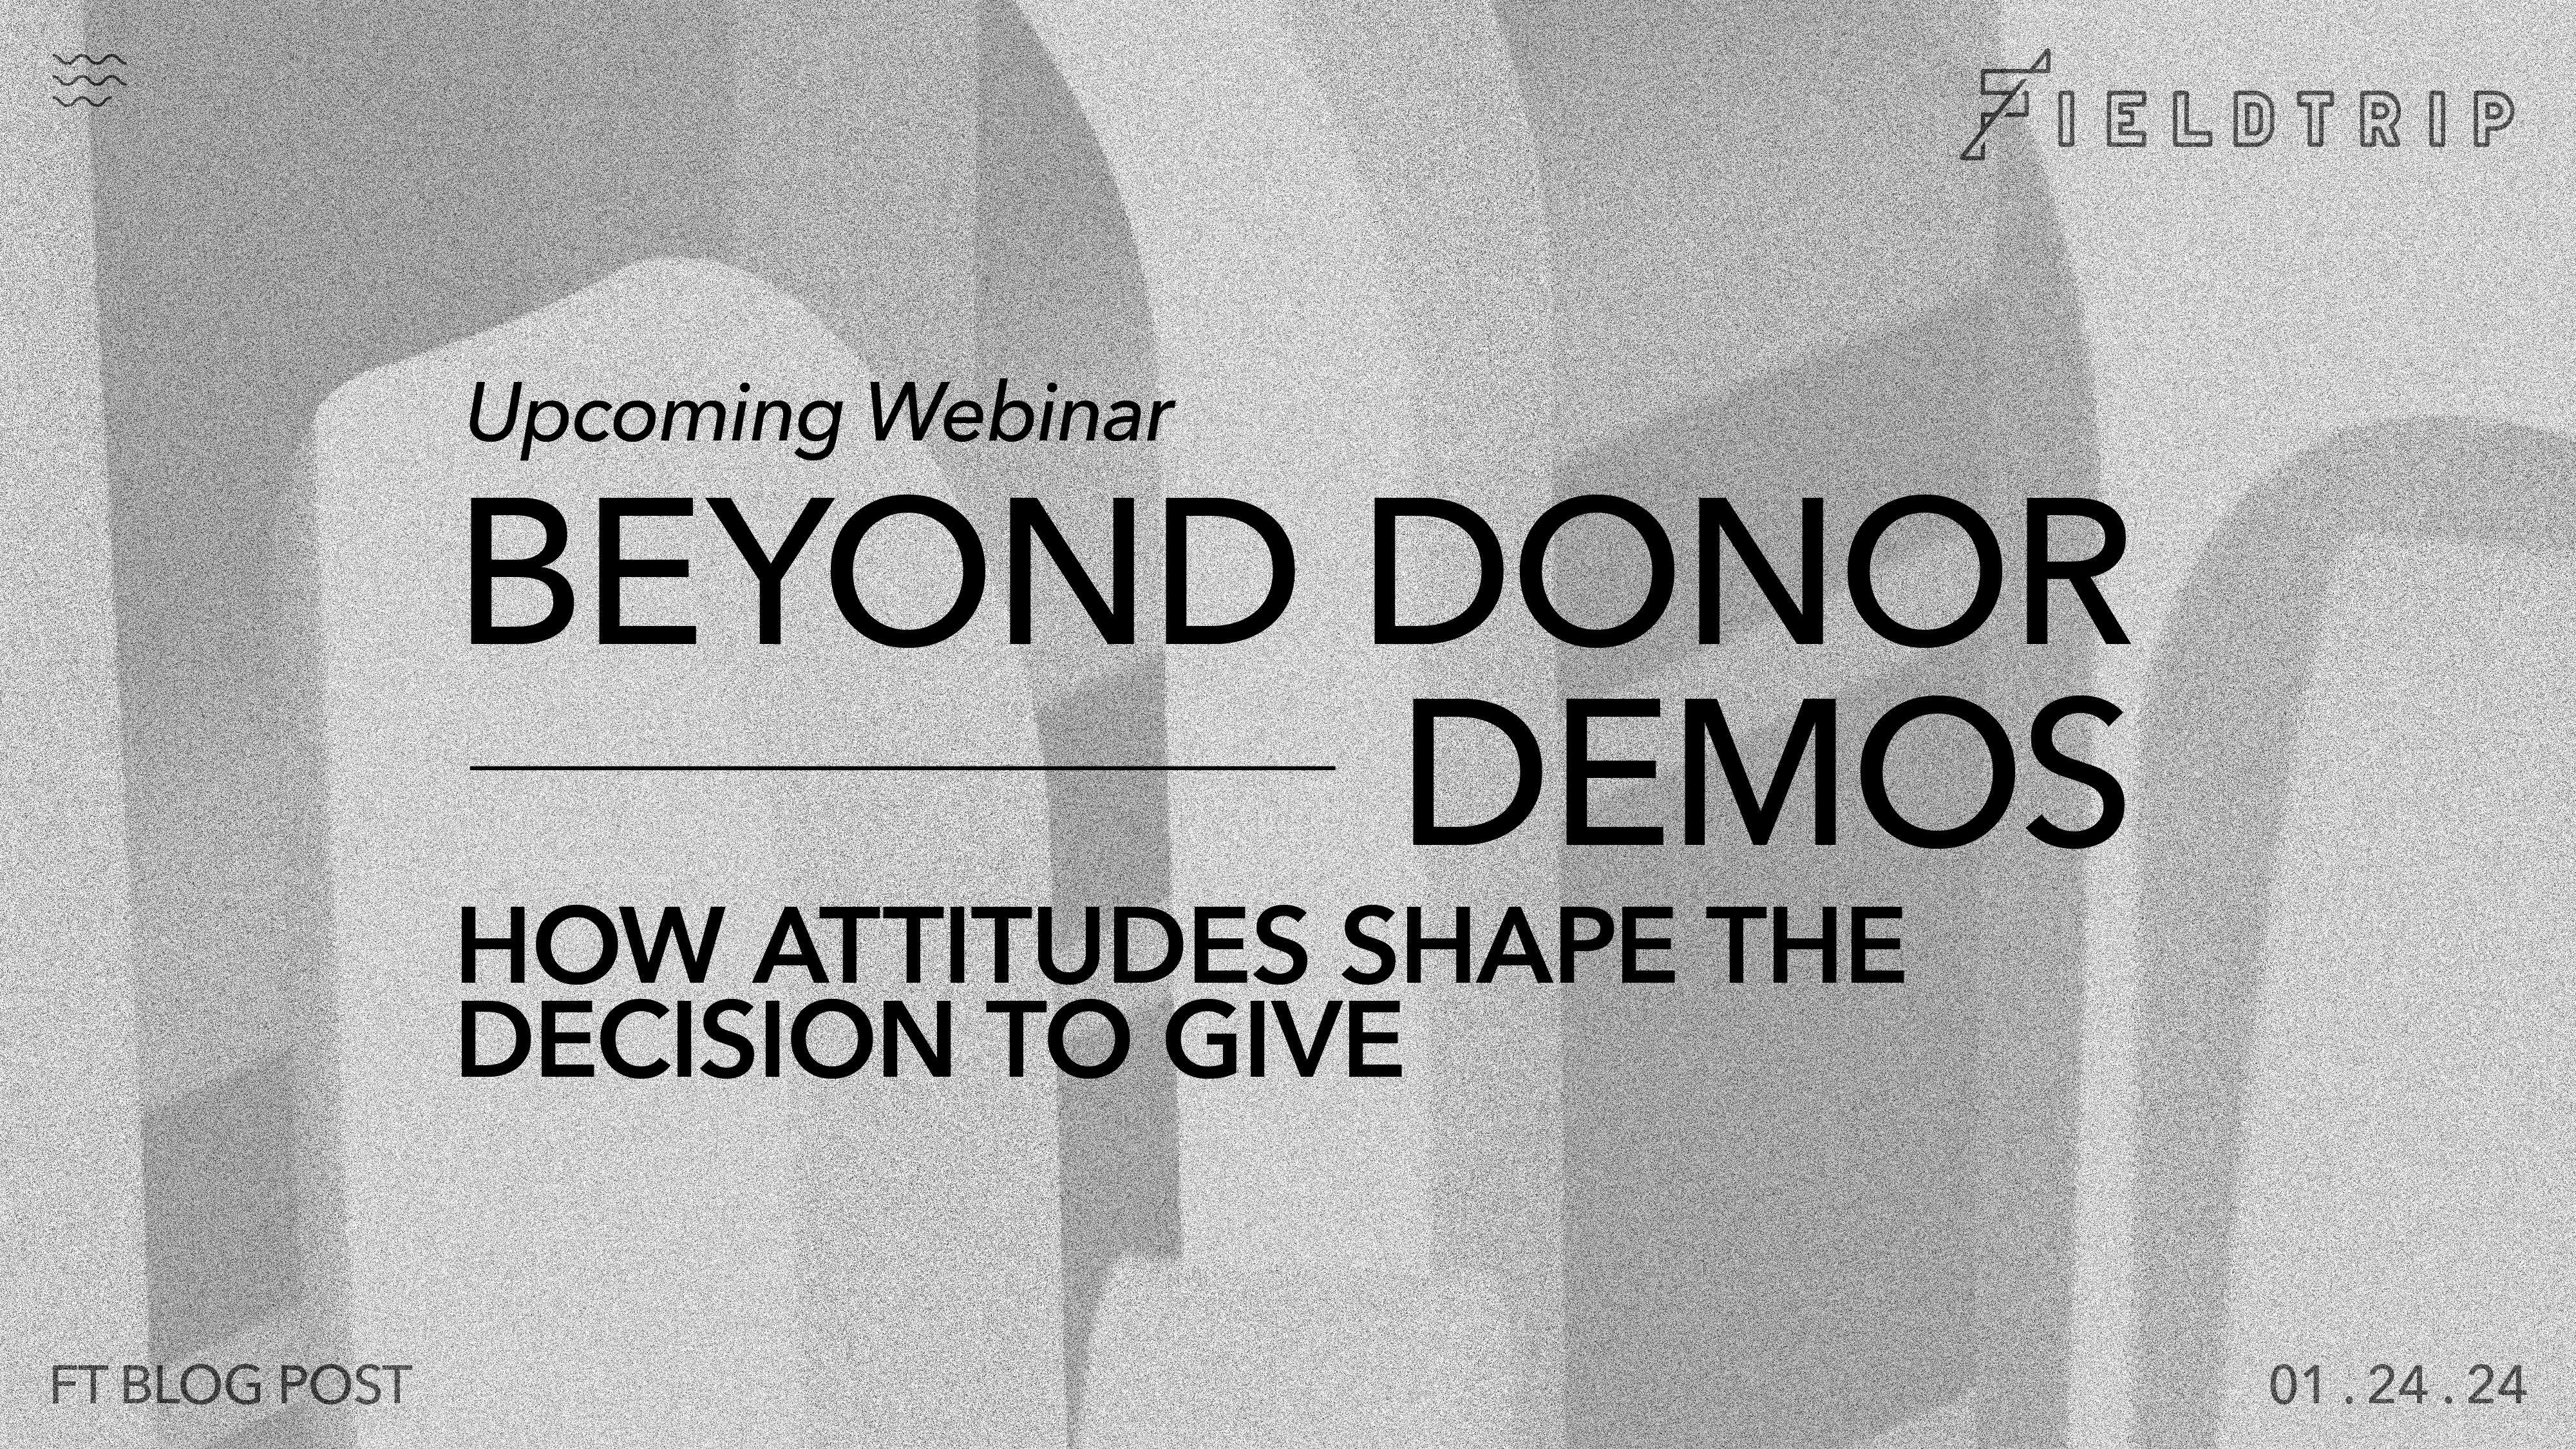 Beyond Donor Demos: How Attitudes Shape the Decision to Give